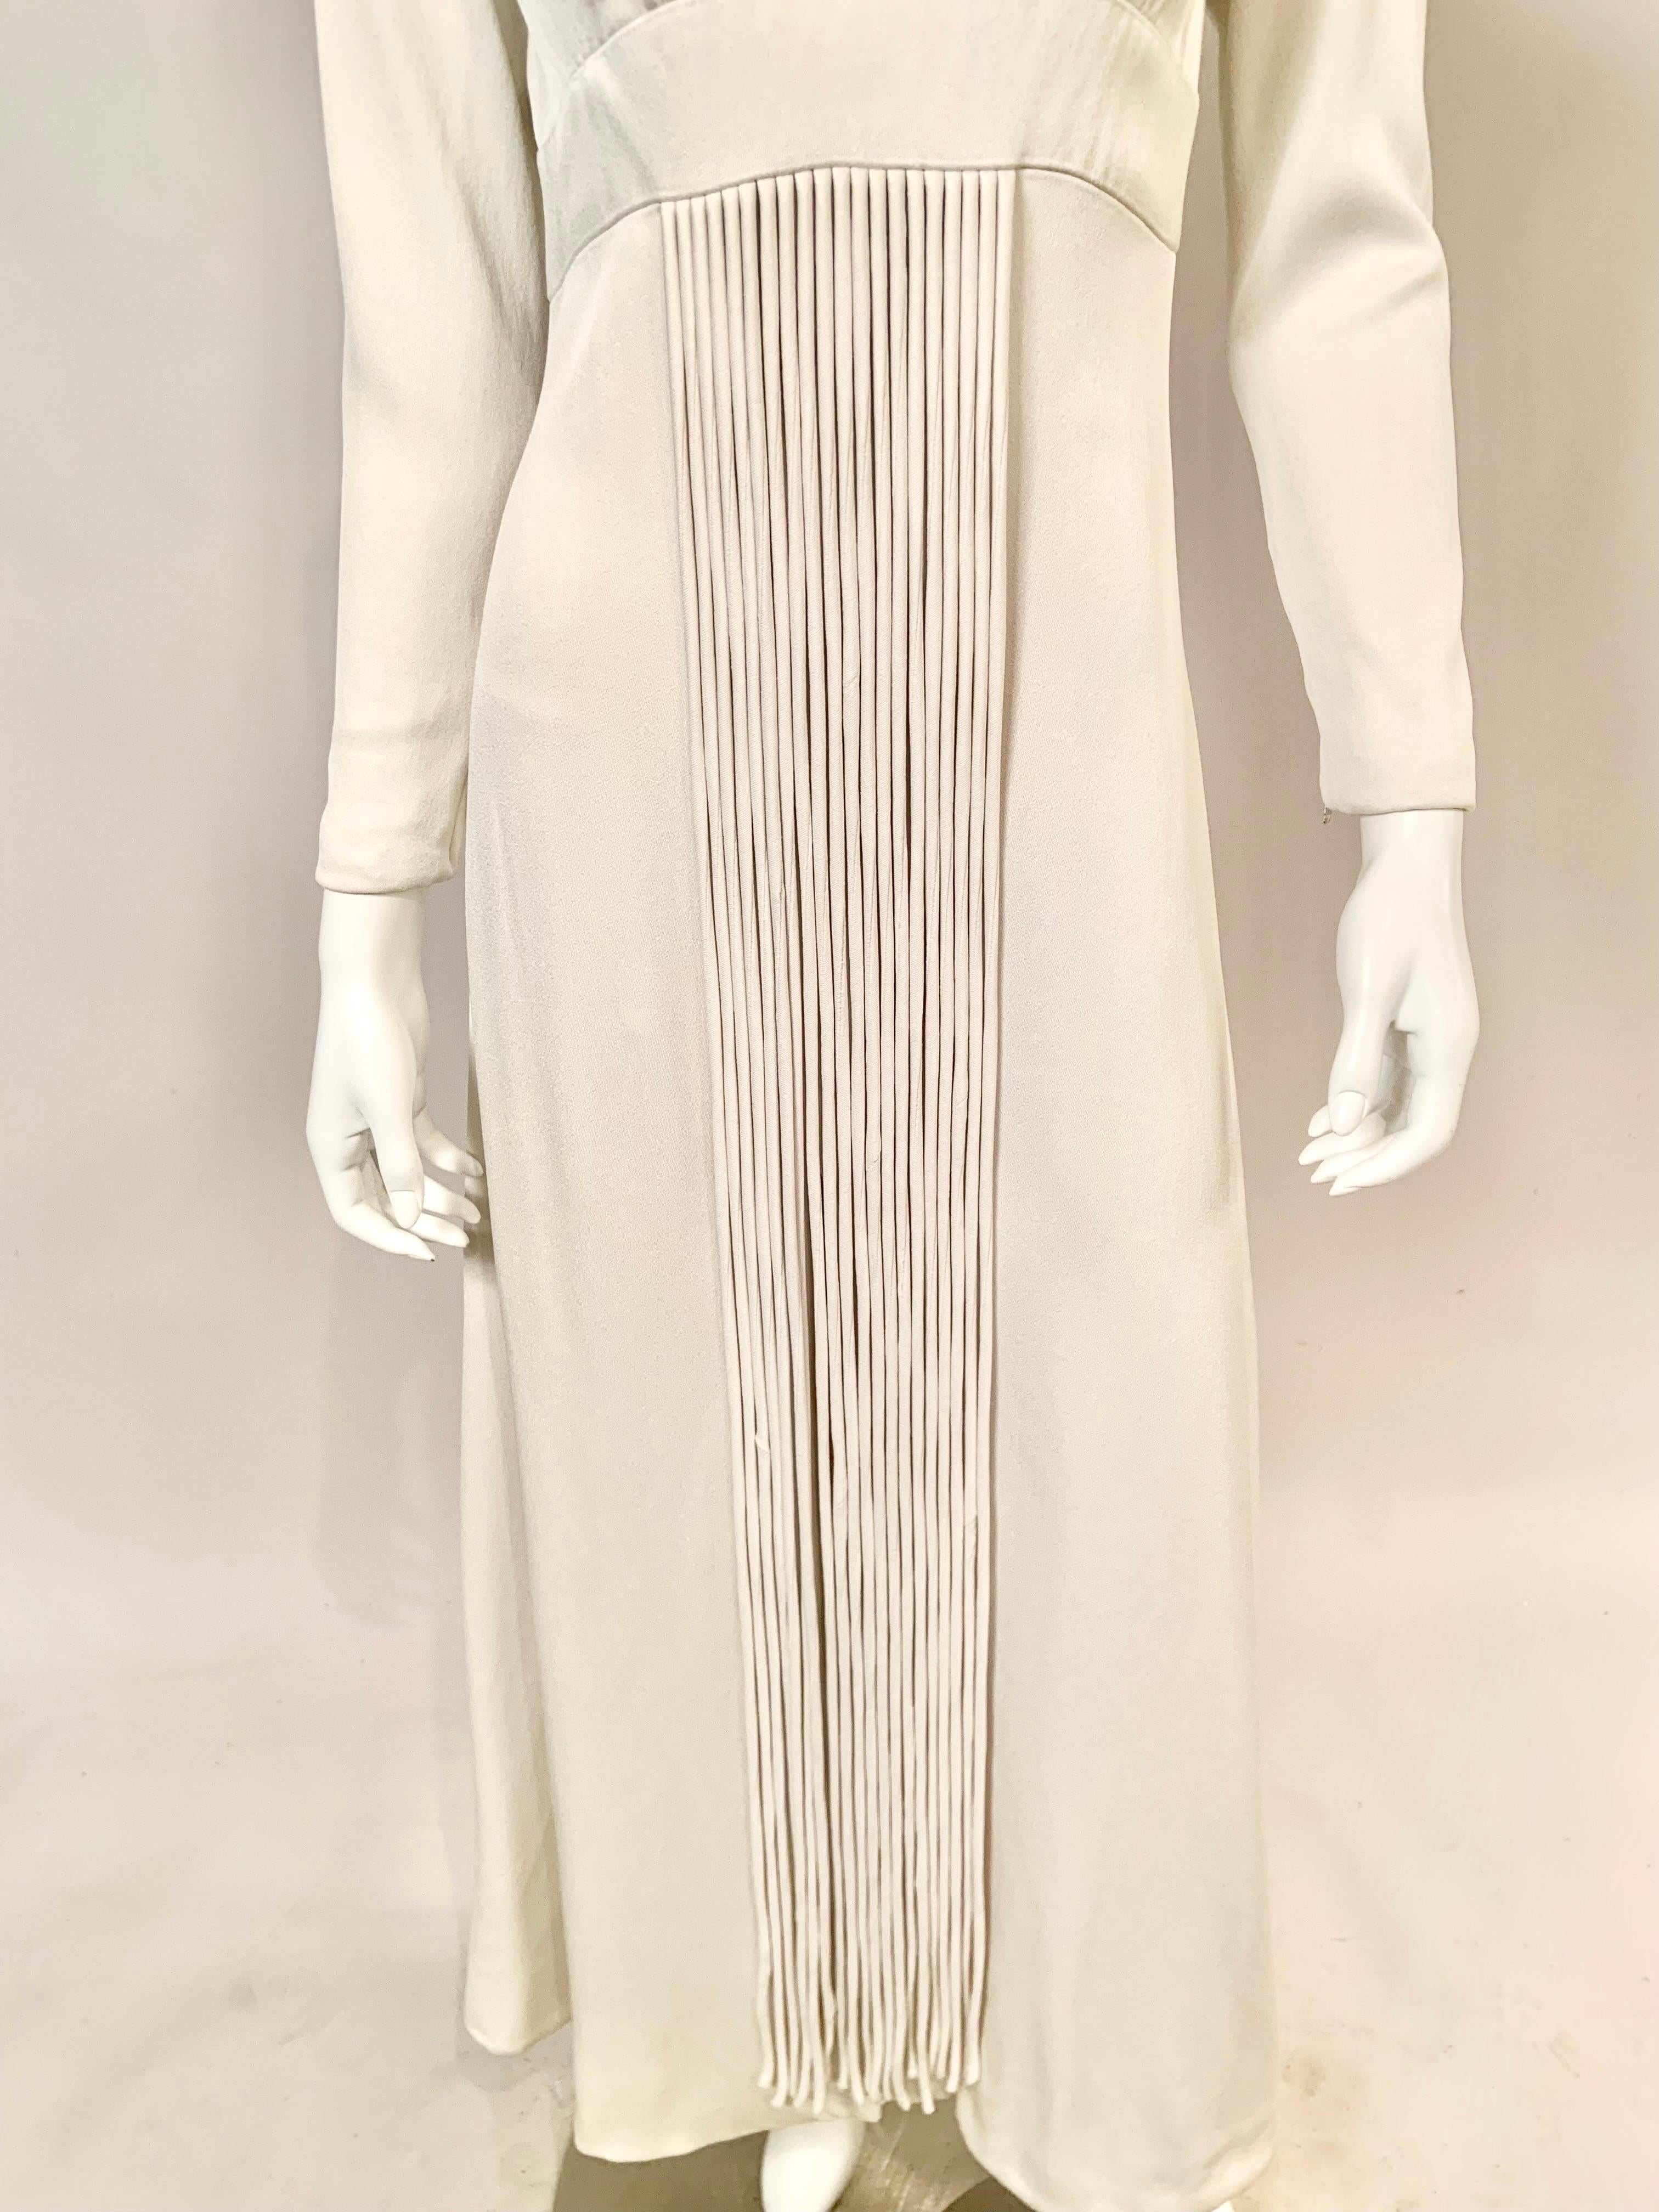 Women's 1970's Travilla White Silk Crepe Gown with Unusual Cord Decoration  For Sale